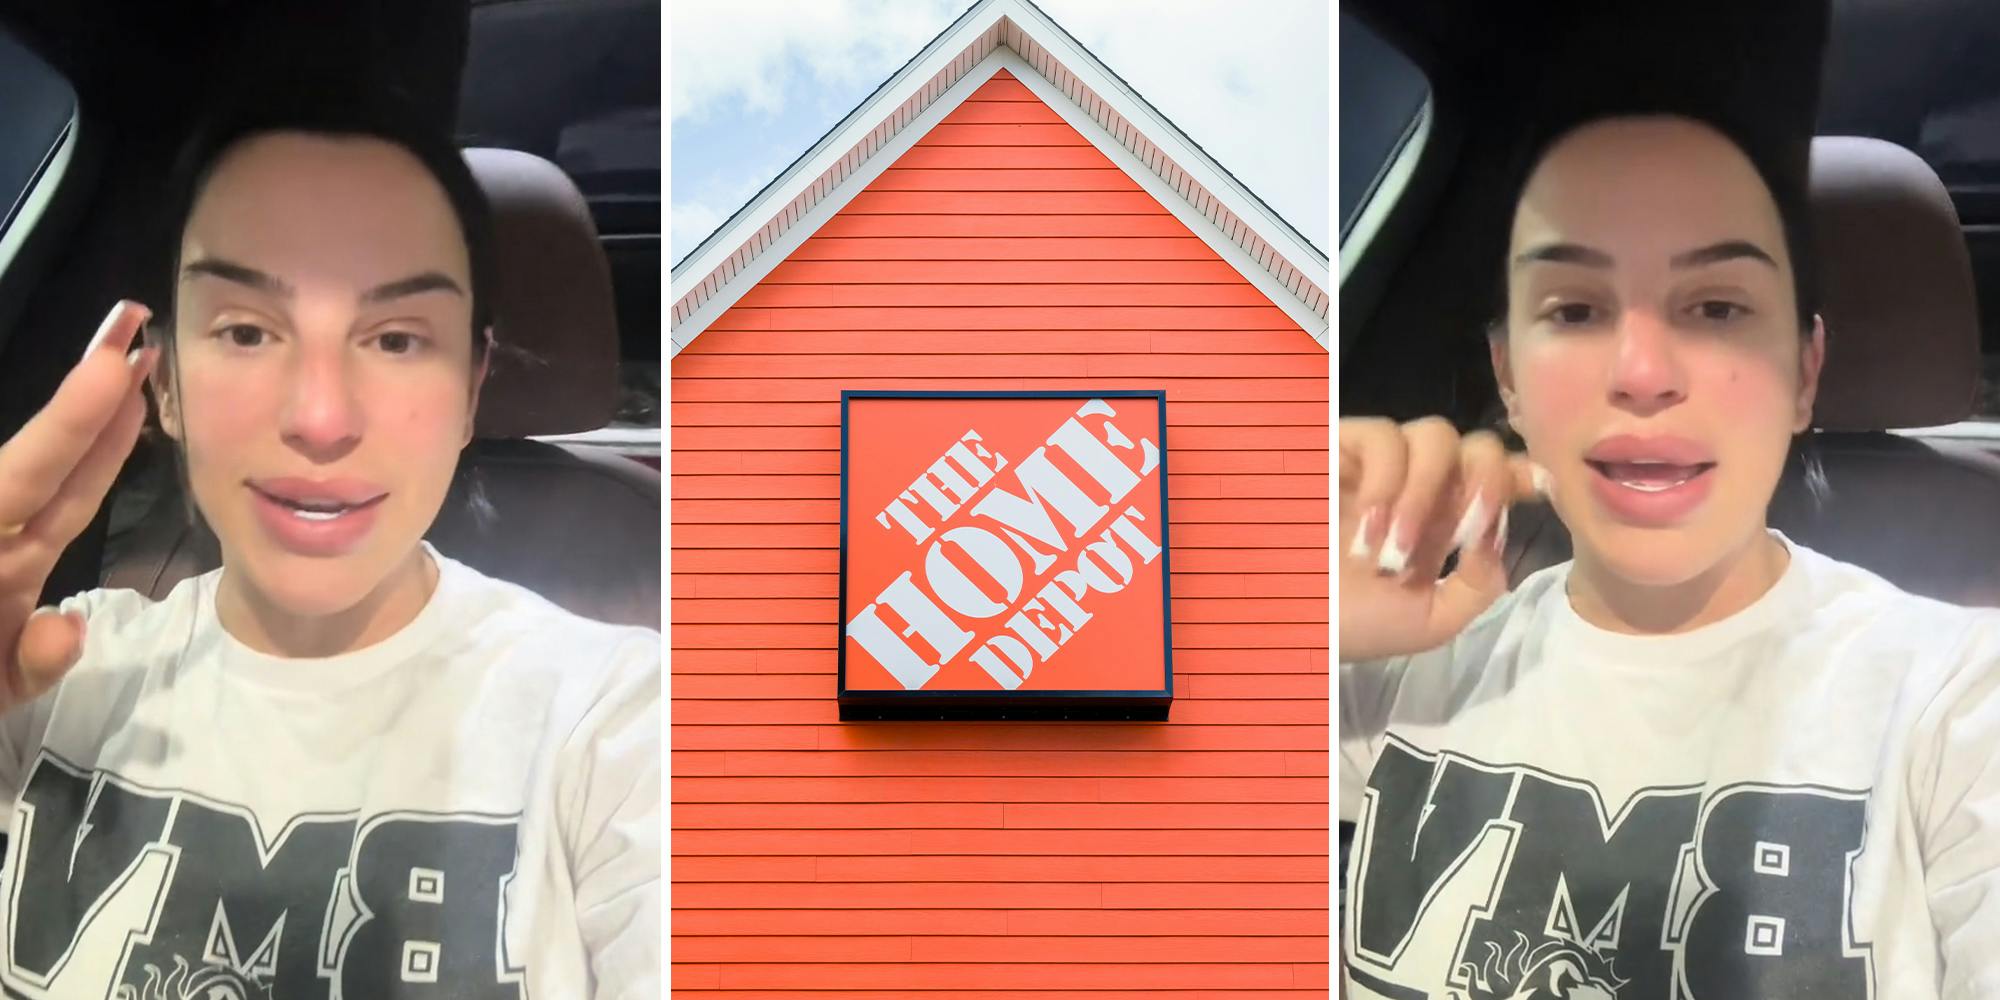 Home Depot customer tries to return $472 Christmas tree. Store says it’s already been returned